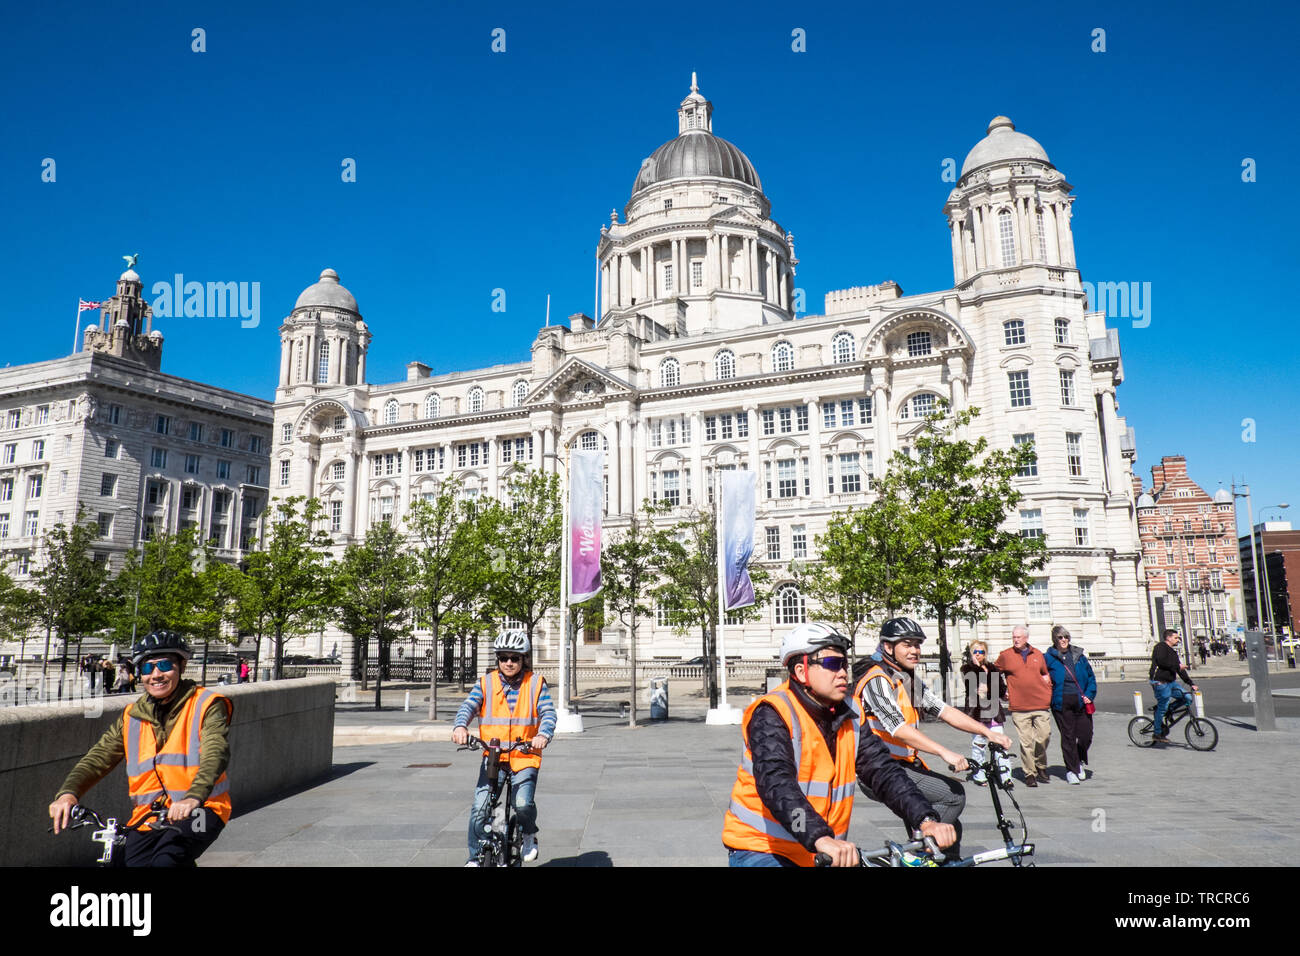 Port of Liverpool Building,Bicycle,bicyles,tour,tourists,waterfront,River Mersey,Liverpool,Merseyside,England,GB,UK,Great Britain,British Stock Photo